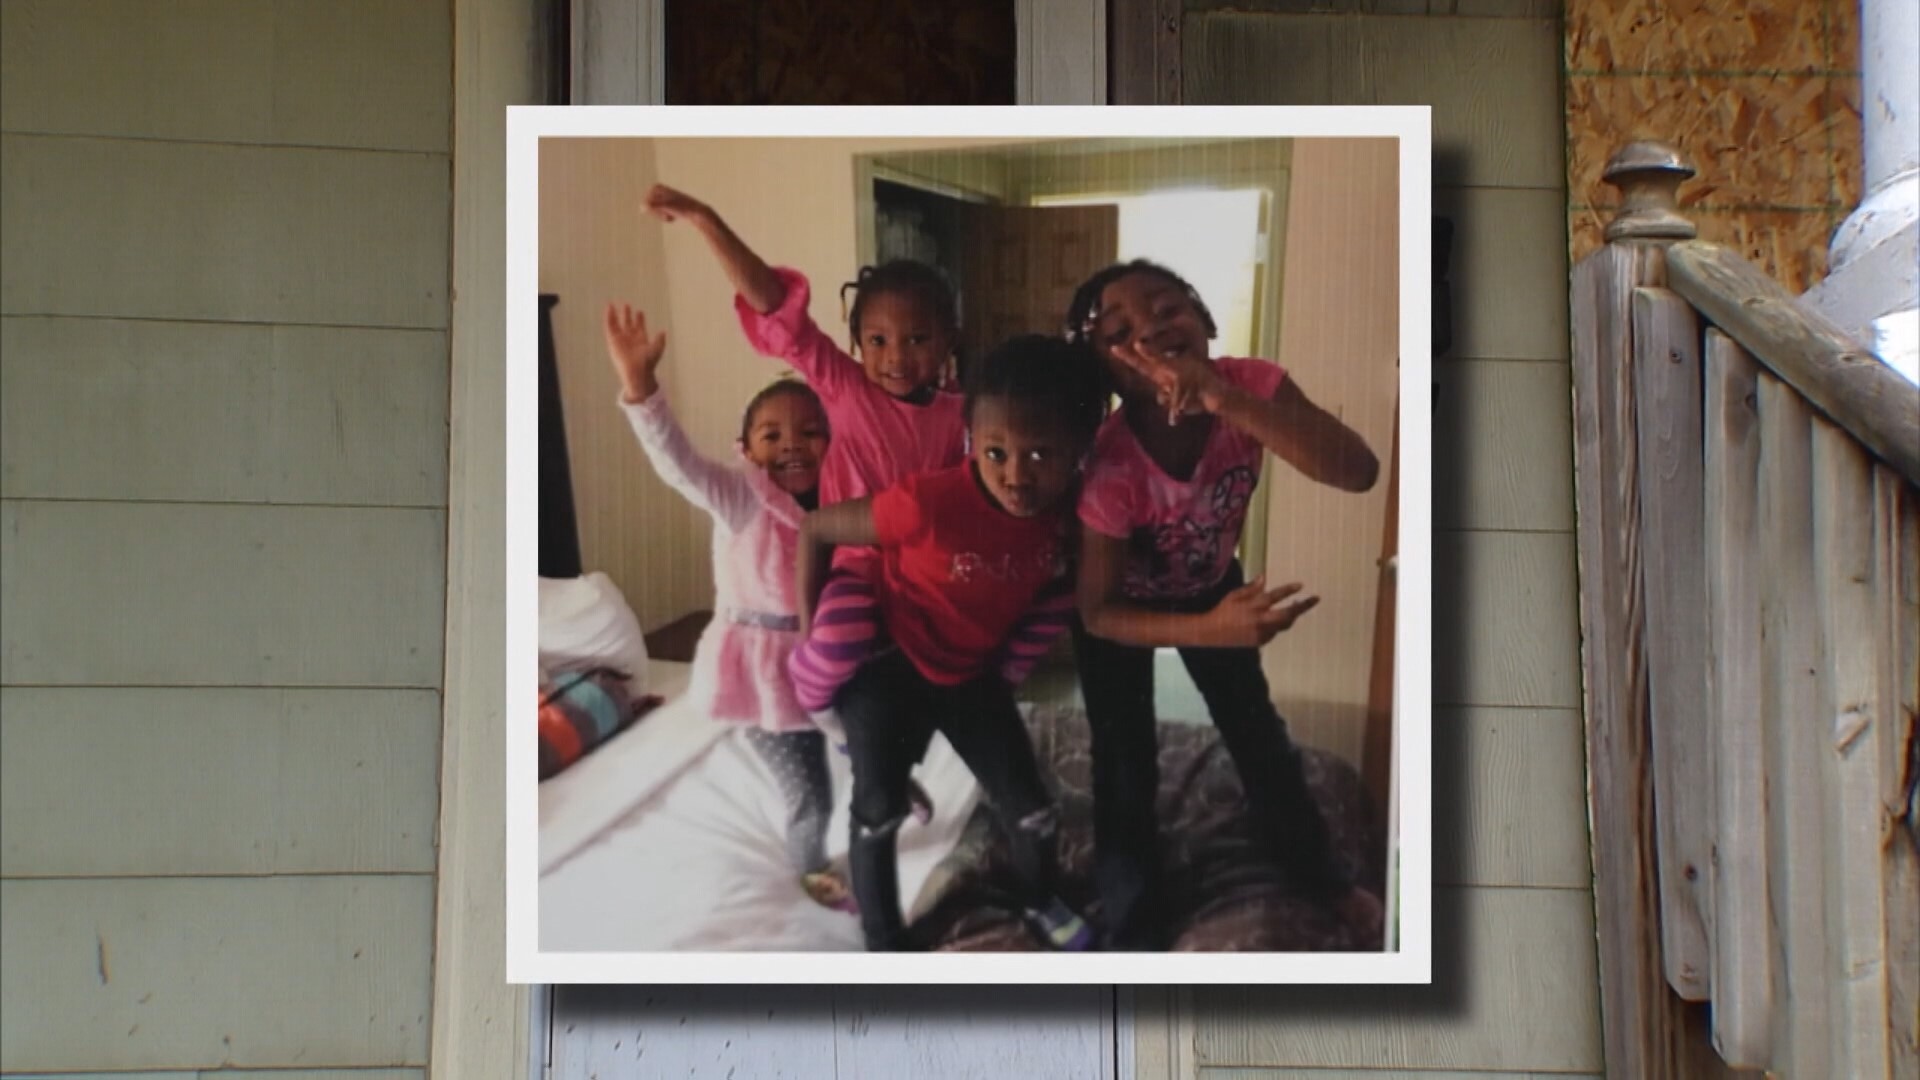 4 young girls died in a house fire in Nov 2016. The fire was ruled an arson and remains unsolved to this day. We look back at our investigation over the past 6 years